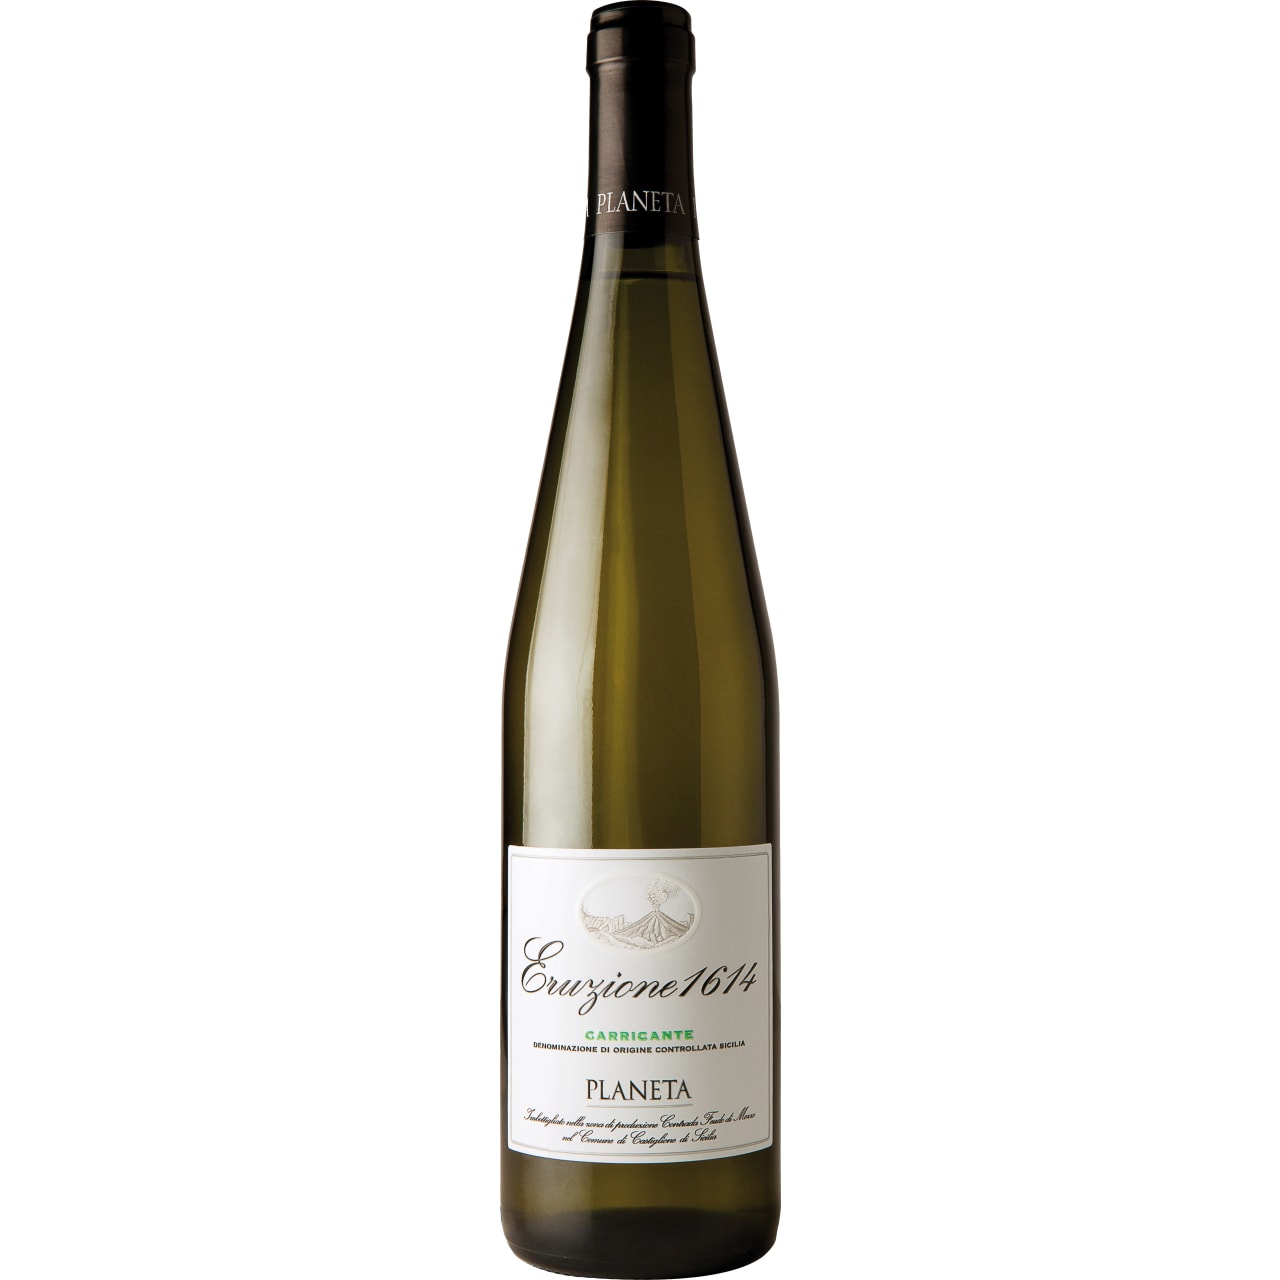 A soft and concentrated palate exhibits flavors of lemon zest and green apple with mineral notes.